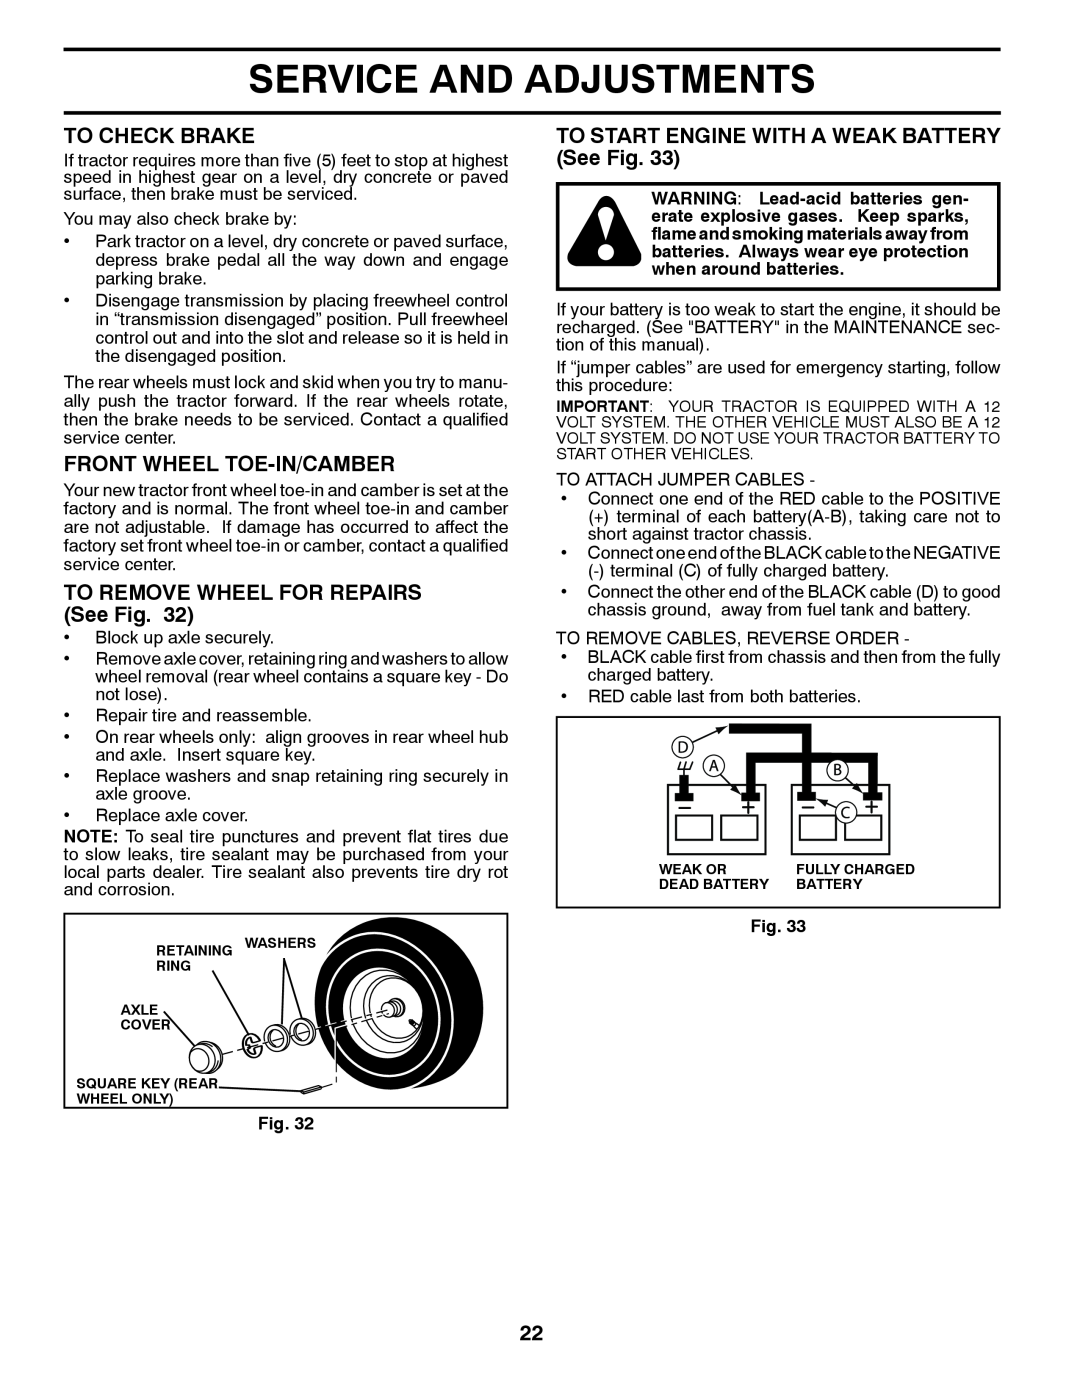 Husqvarna YTH22V46XLS owner manual To Check Brake, Front Wheel Toe-In/Camber, TO REMOVE WHEEL FOR REPAIRS See Fig 